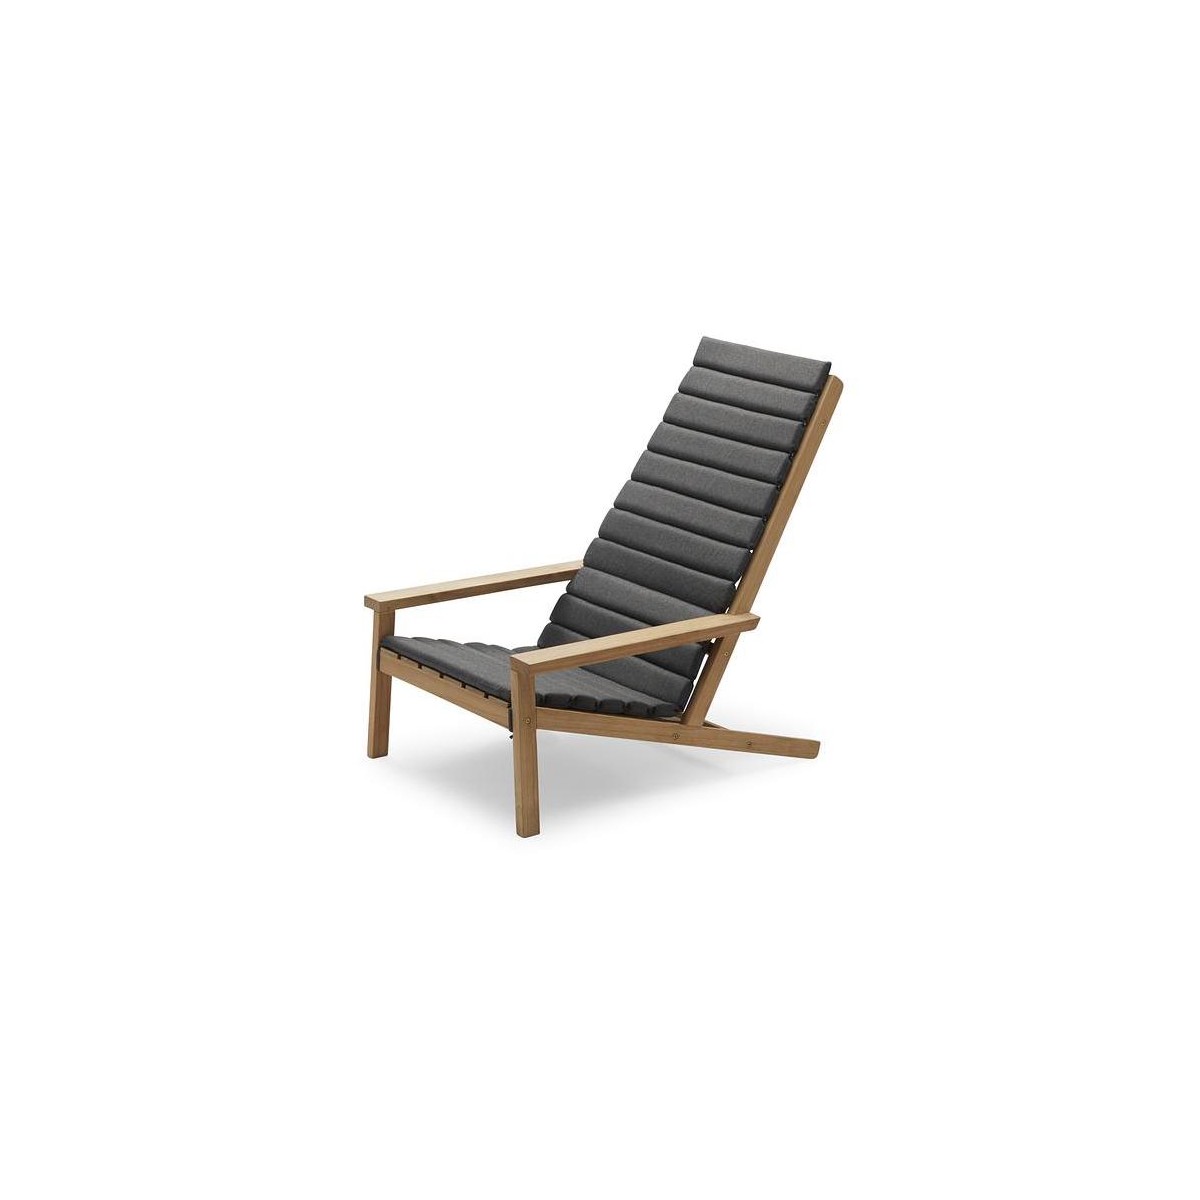 Charcoal Cushion for Between Lines Deck Chair – Skagerak